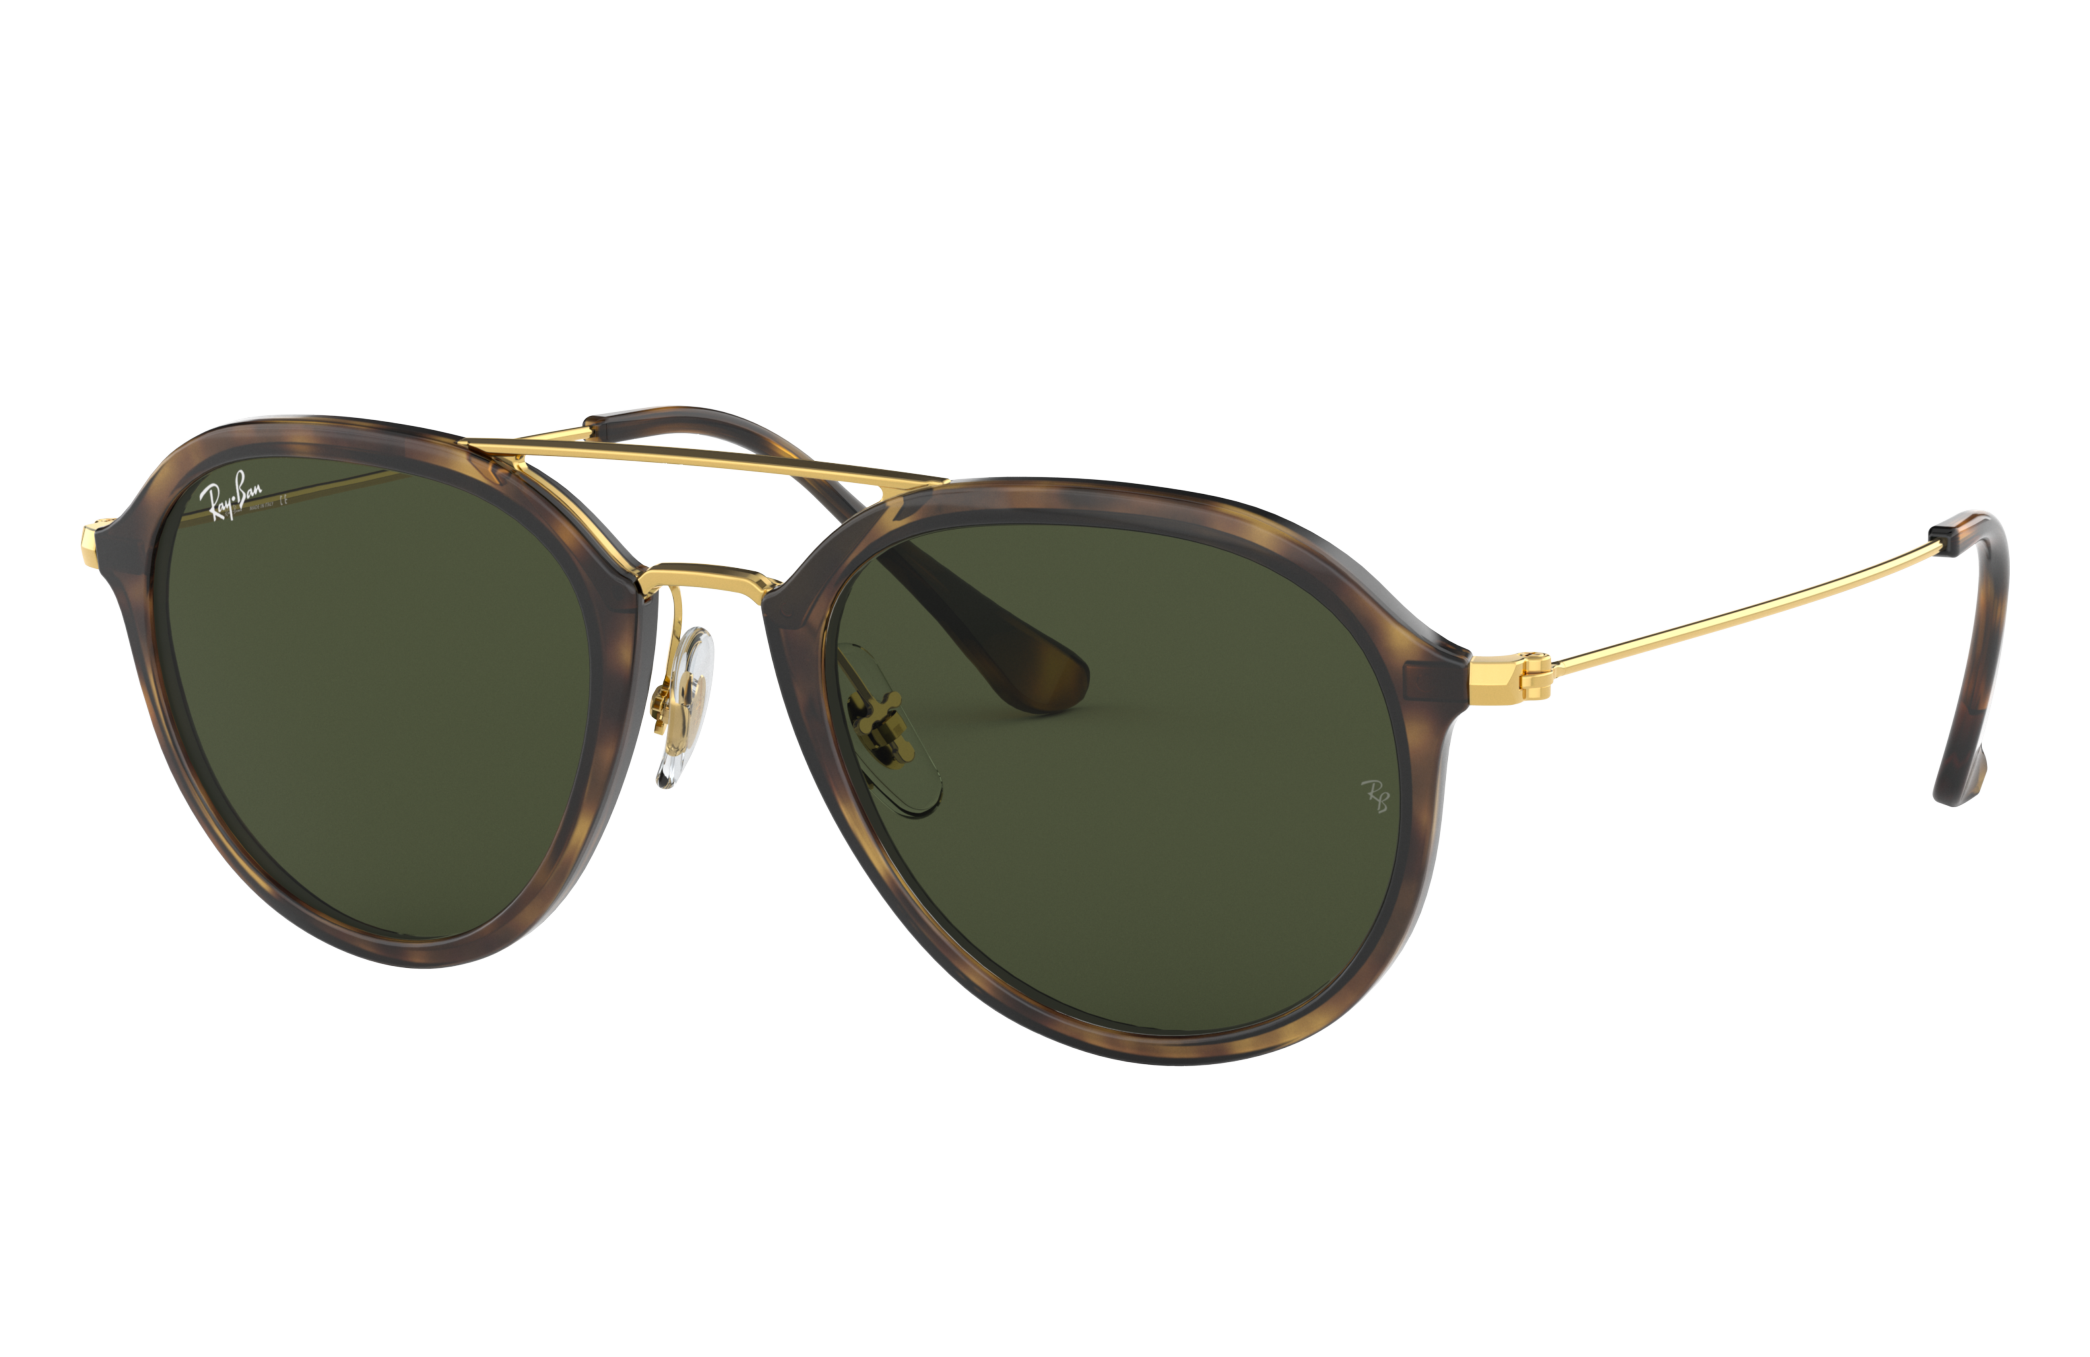 rb4253-sunglasses-in-light-havana-and-green-ray-ban